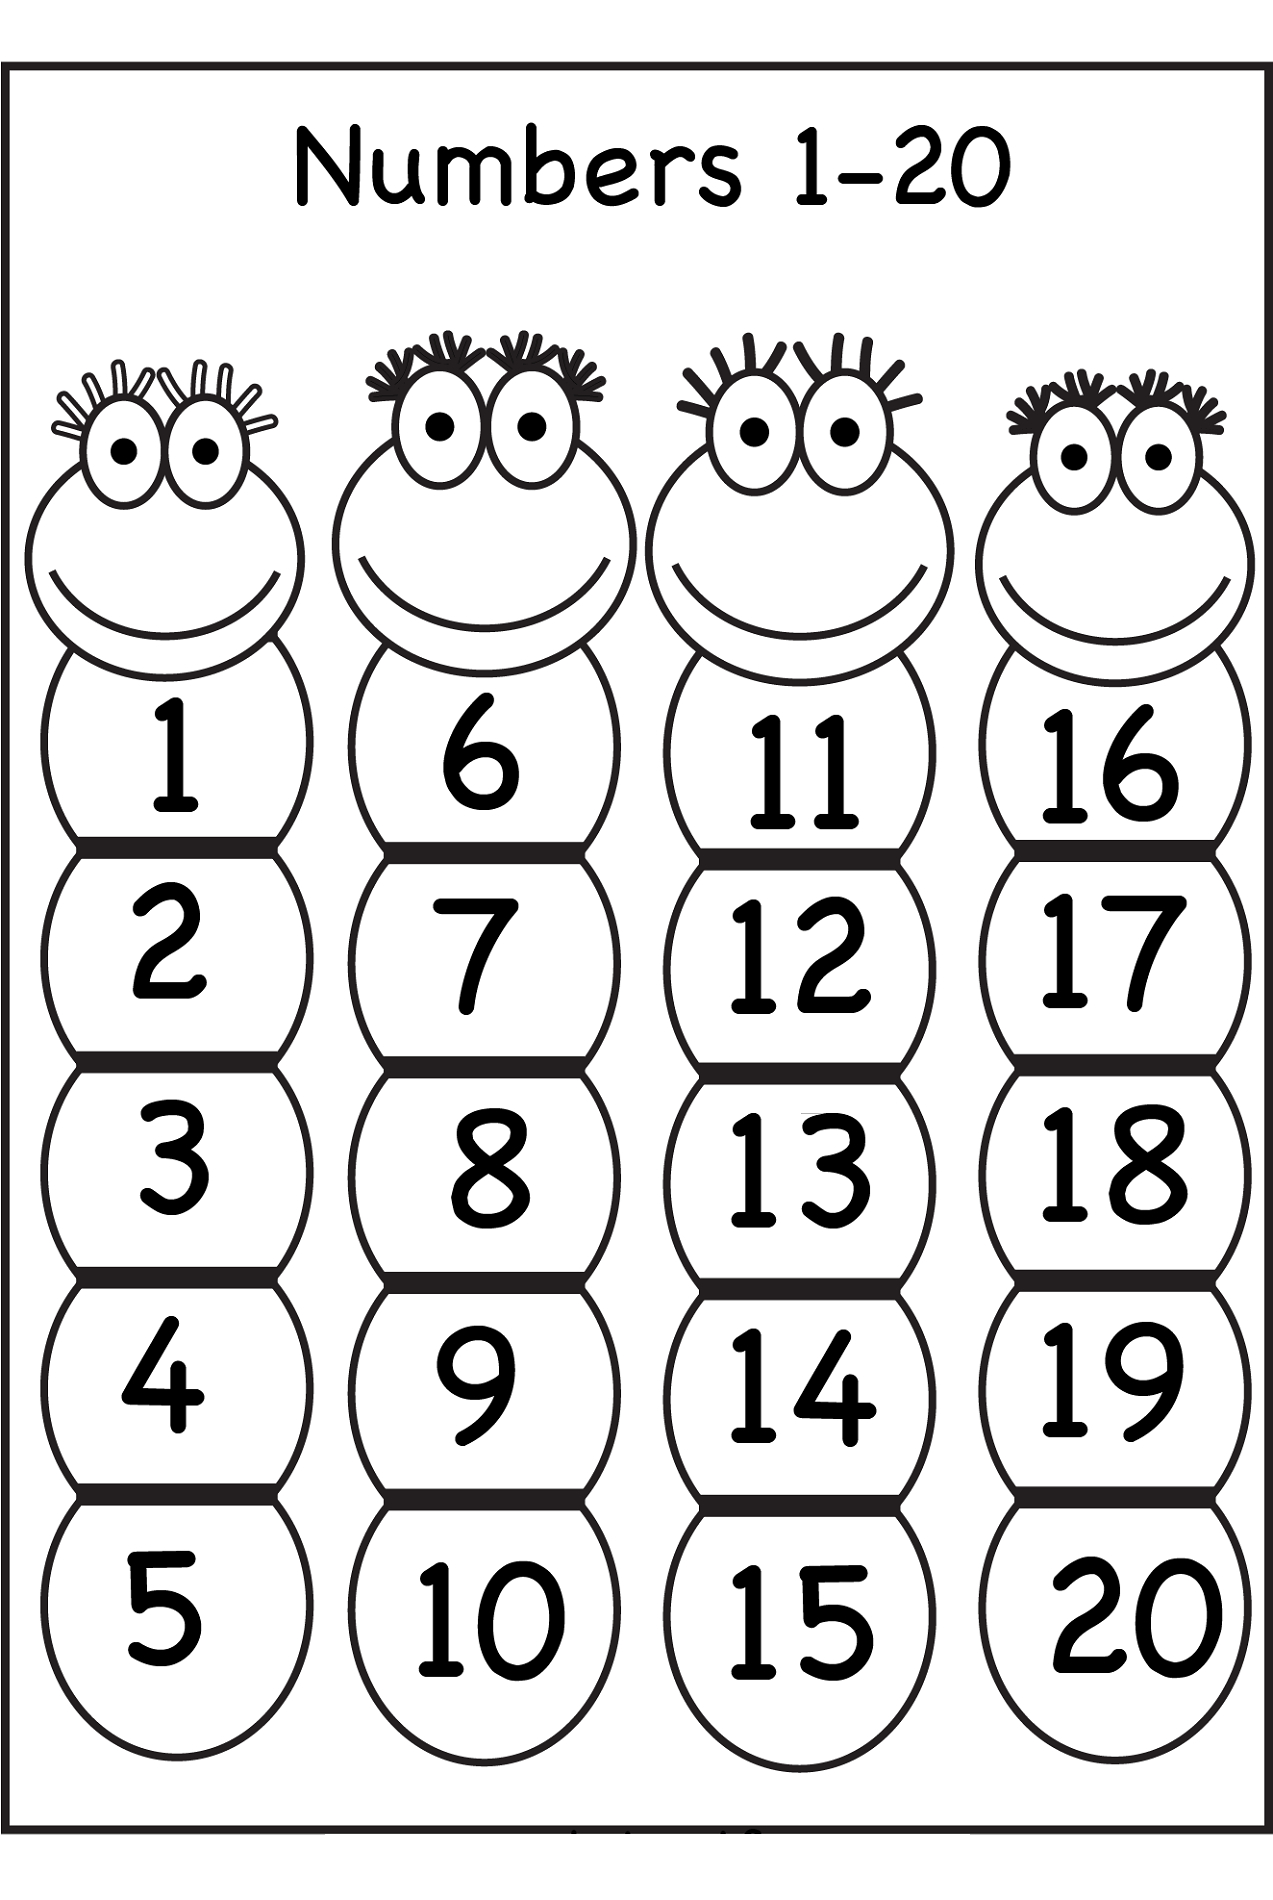 Number Tracing 1 30 Review Work Teaching Math Pinterest Free Printable Tracing Numbers 